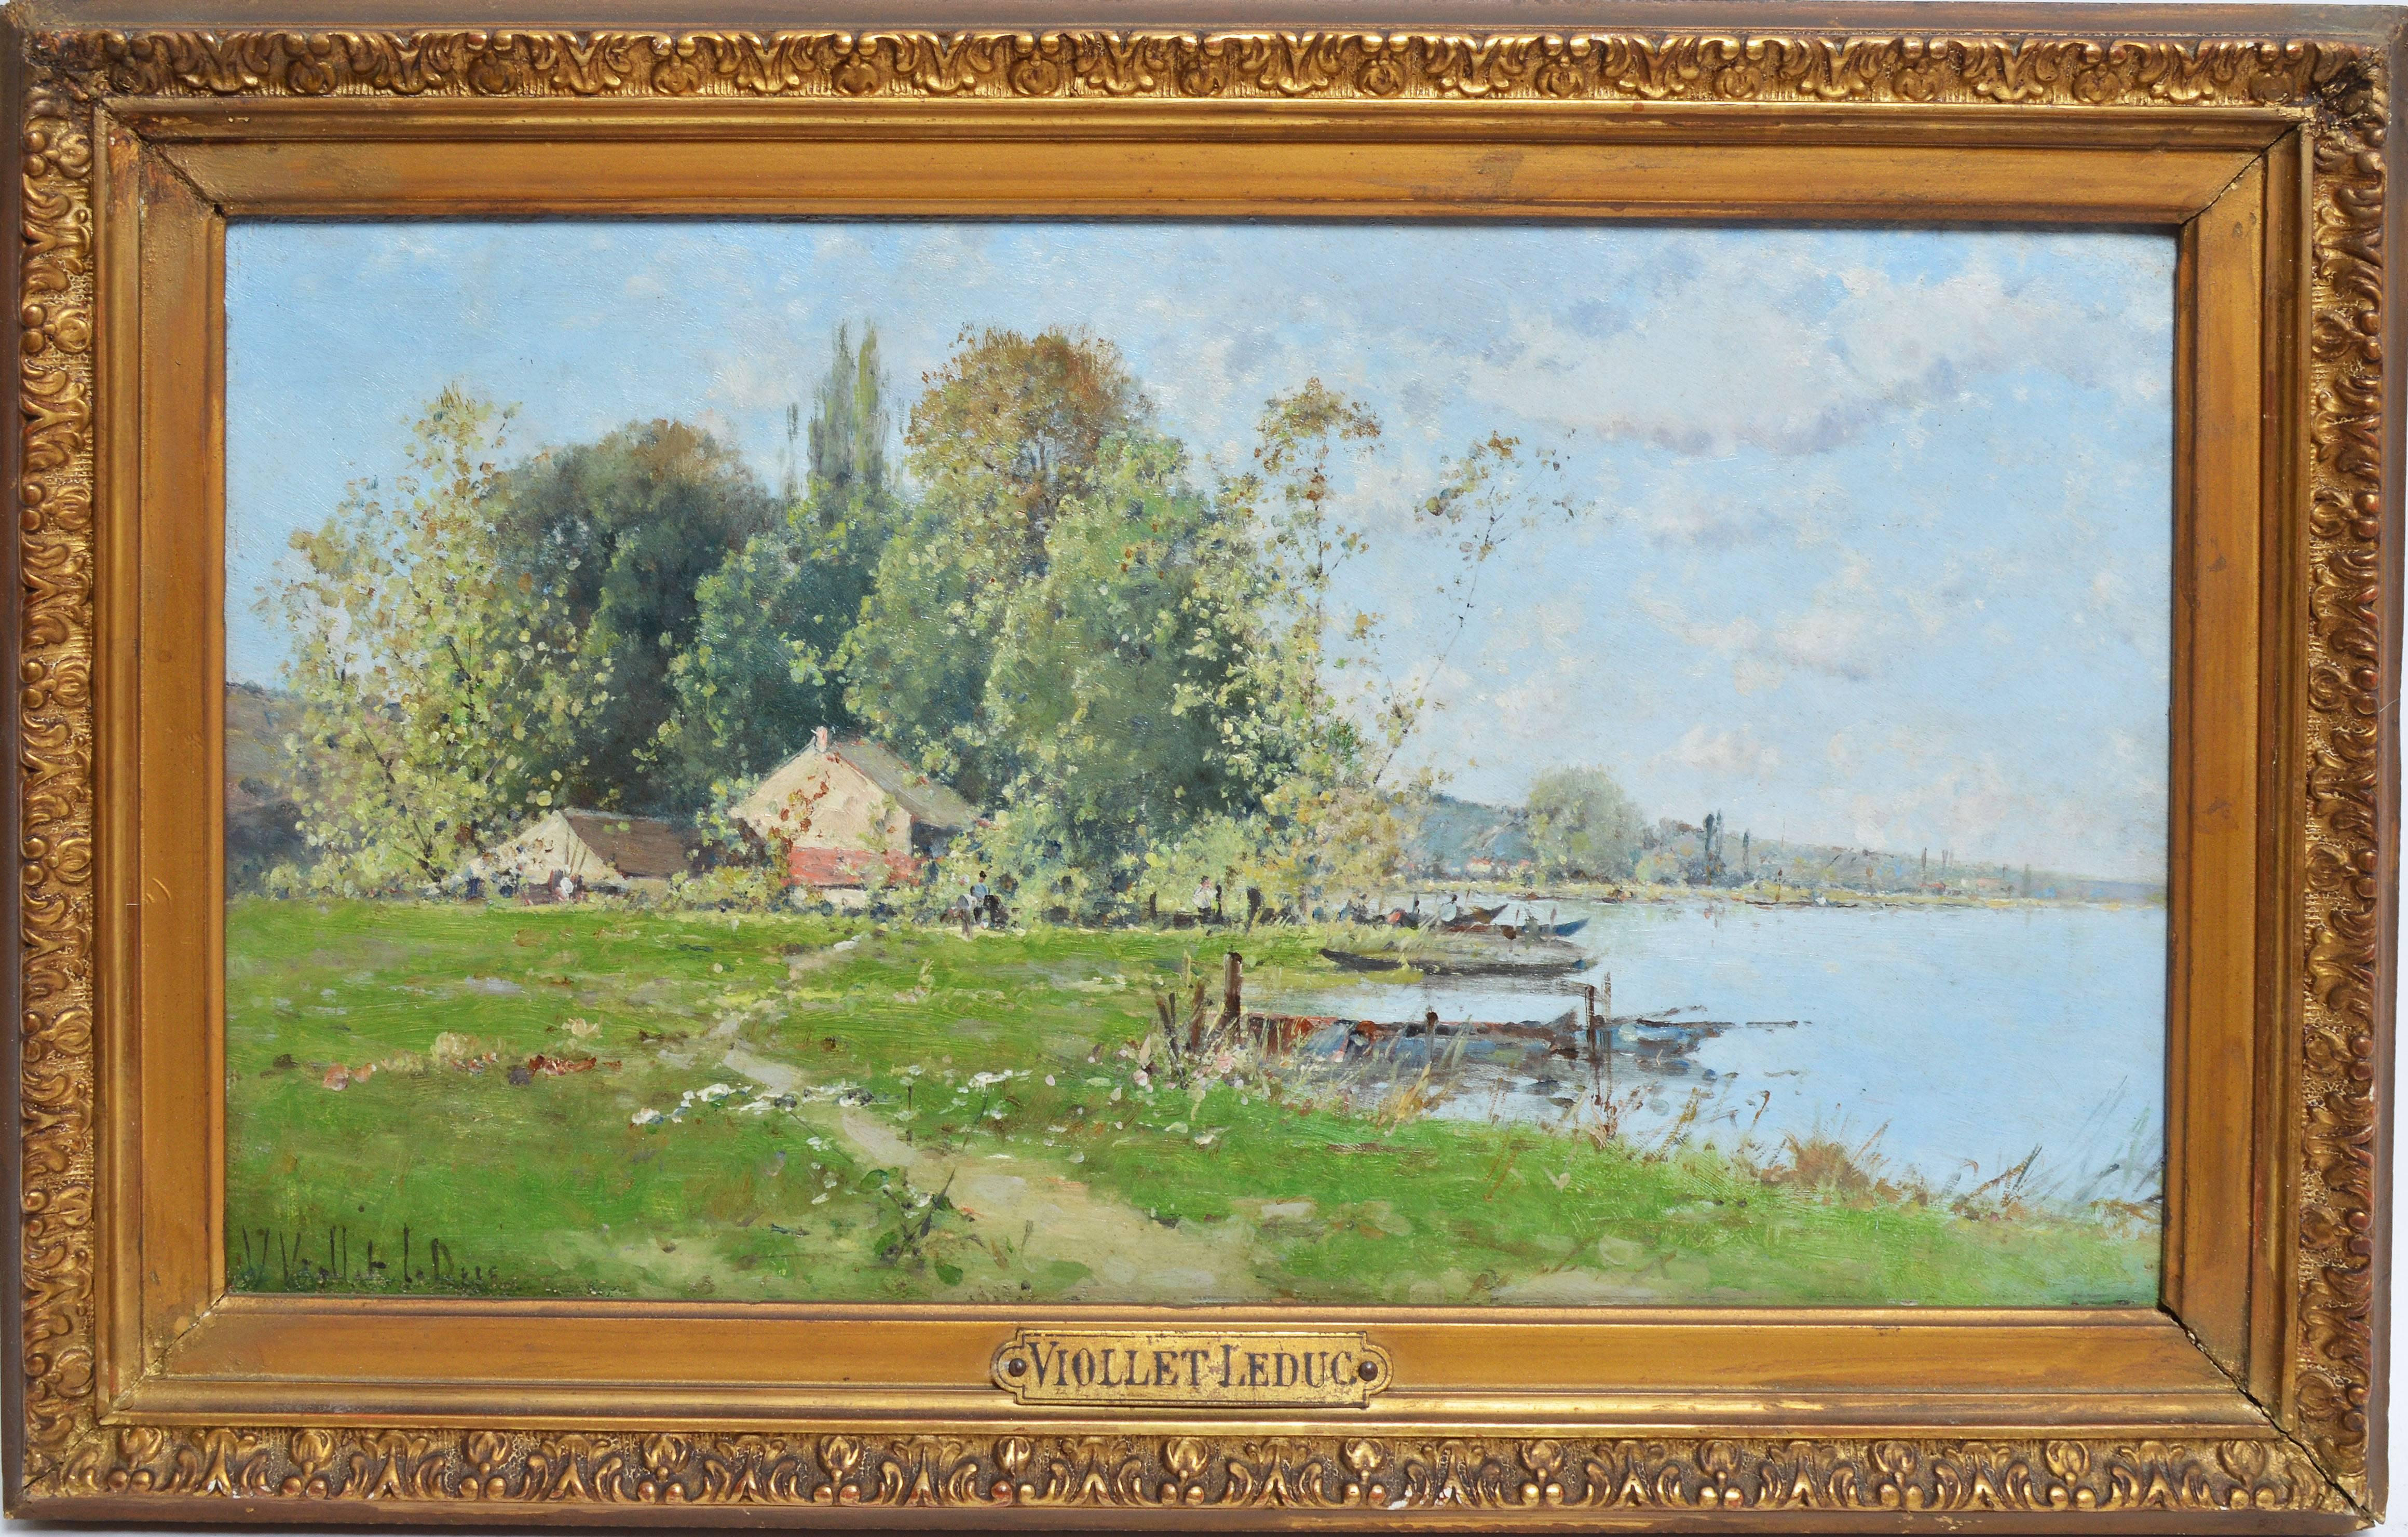 Antique Barbizon school landscape with a lake and house by Victor Viollet-le-Duc (1848-1901).  Oil on board, circa 1875.  Signed lower left, &quot;V. Viollet-le-Duc&quot;.  Displayed in a period giltwood frame.  Image size, 12.5&quot;L x 7.5&quot;H,